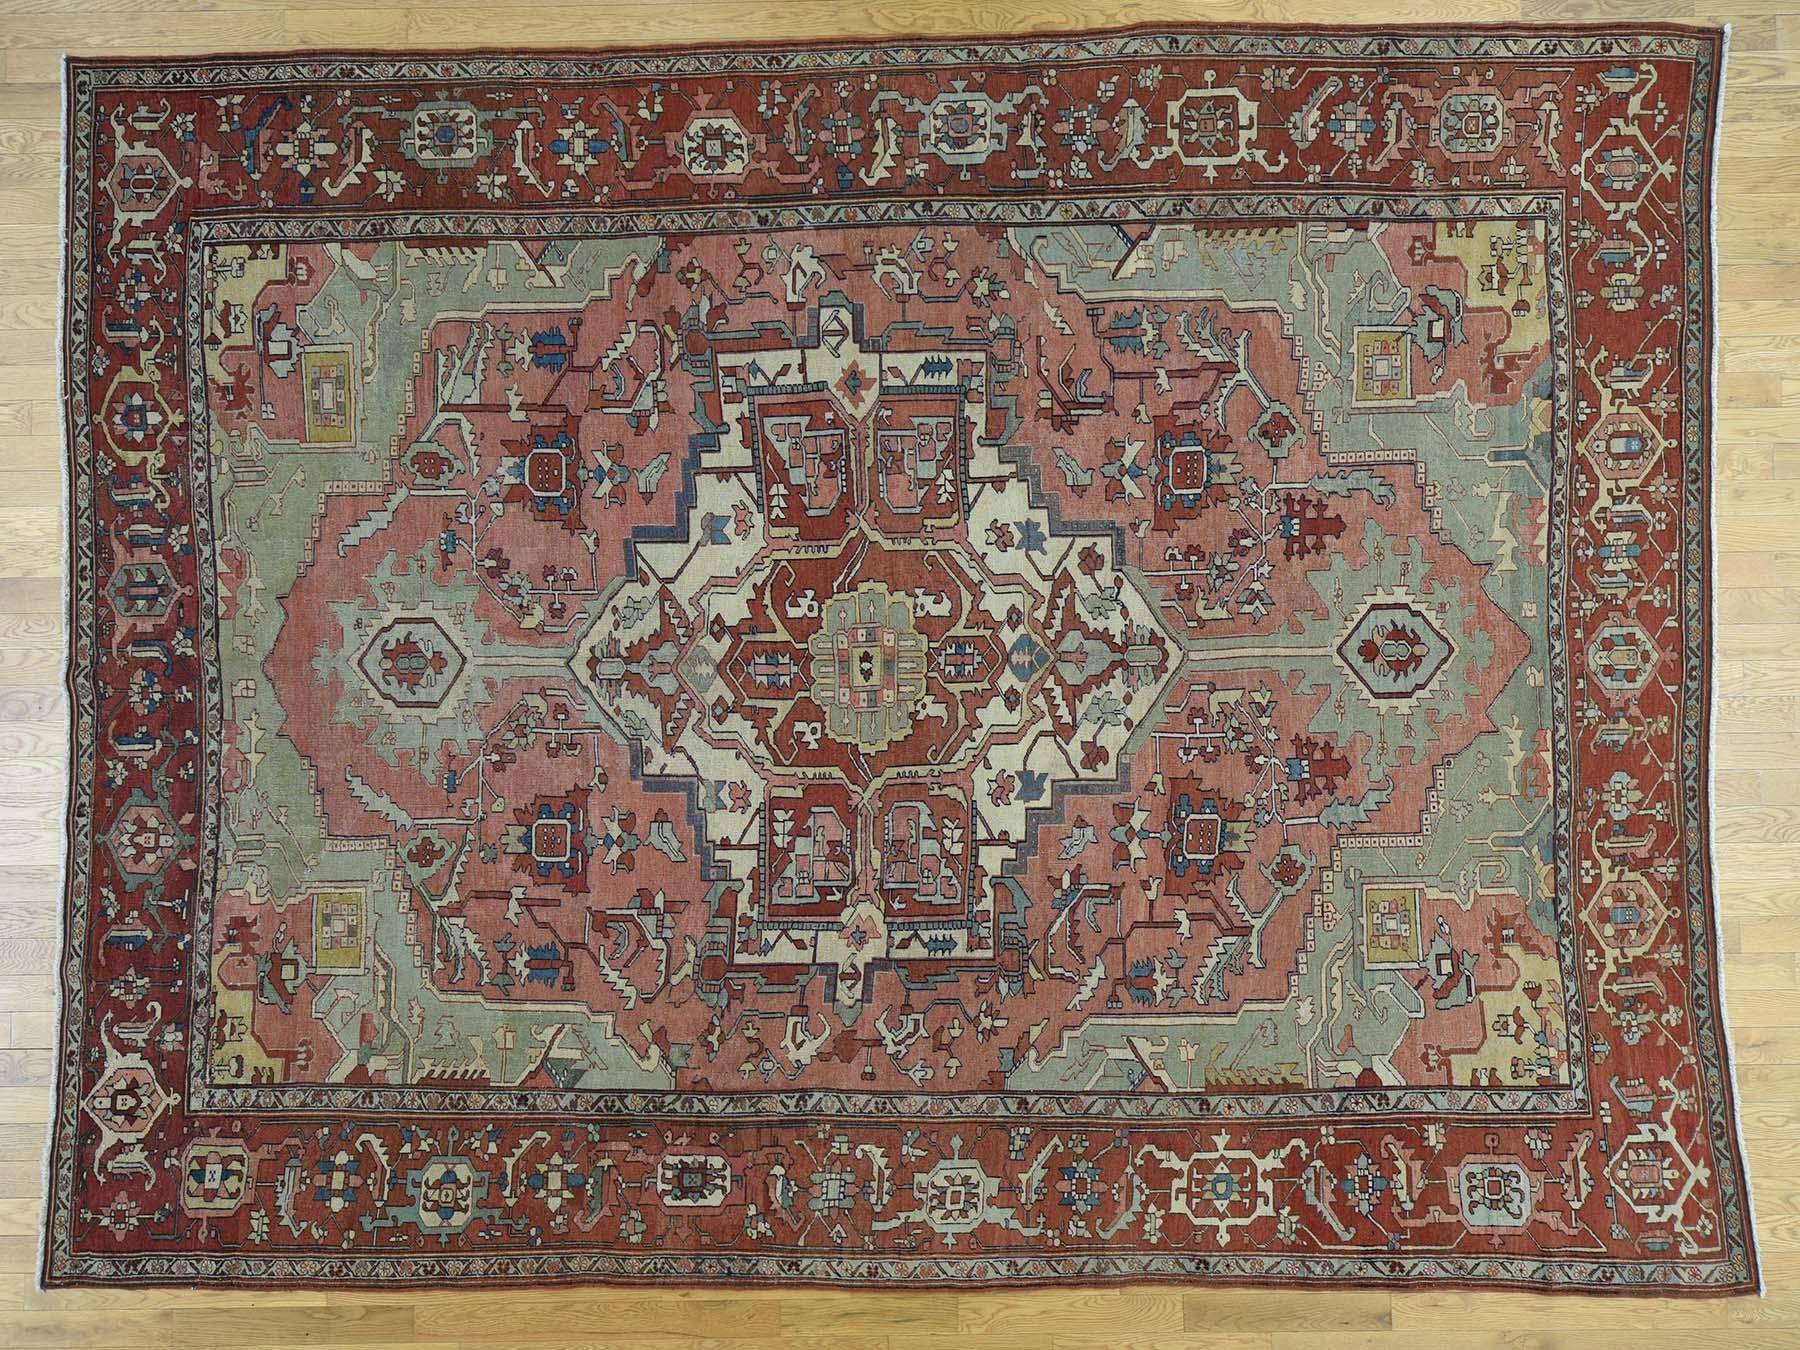 This is a genuine hand knotted oriental rug. It is not hand tufted or machine made rug. Our entire inventory is made of either hand knotted or handwoven rugs.

Adorn your house style with this splendid hand knotted carpet. This handcrafted antique